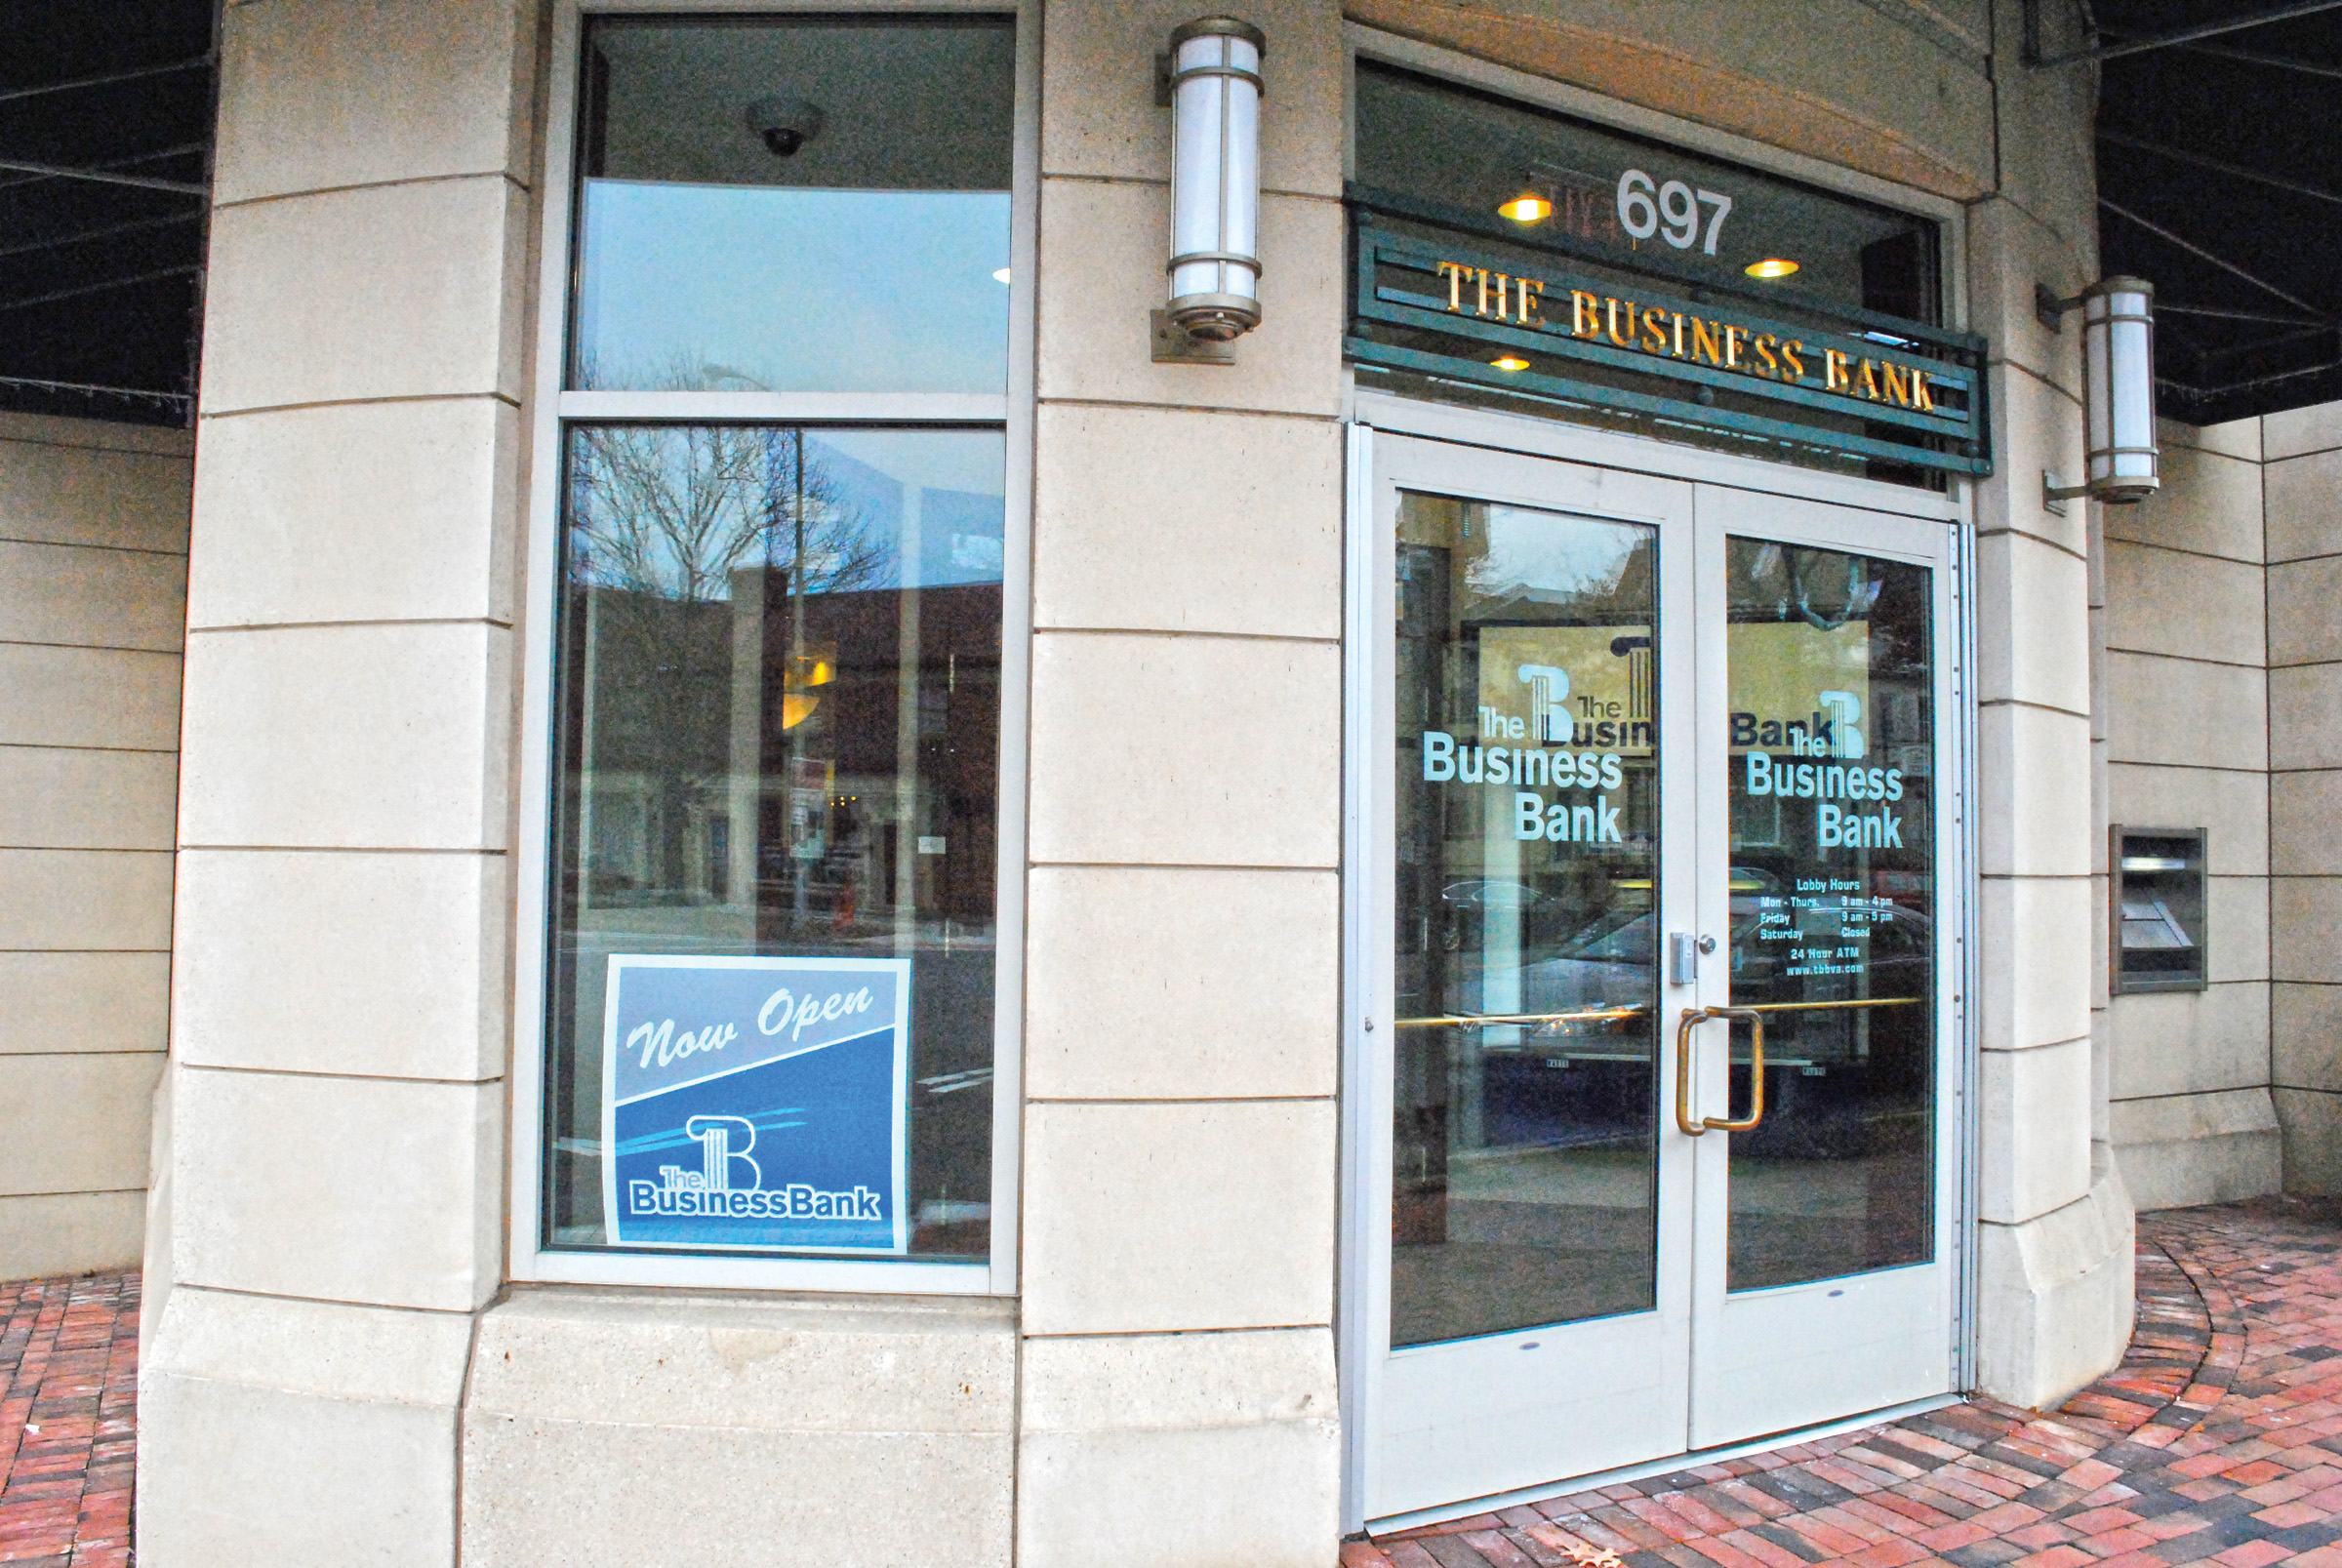 Letter to the Editor: City hall decisions harm small business